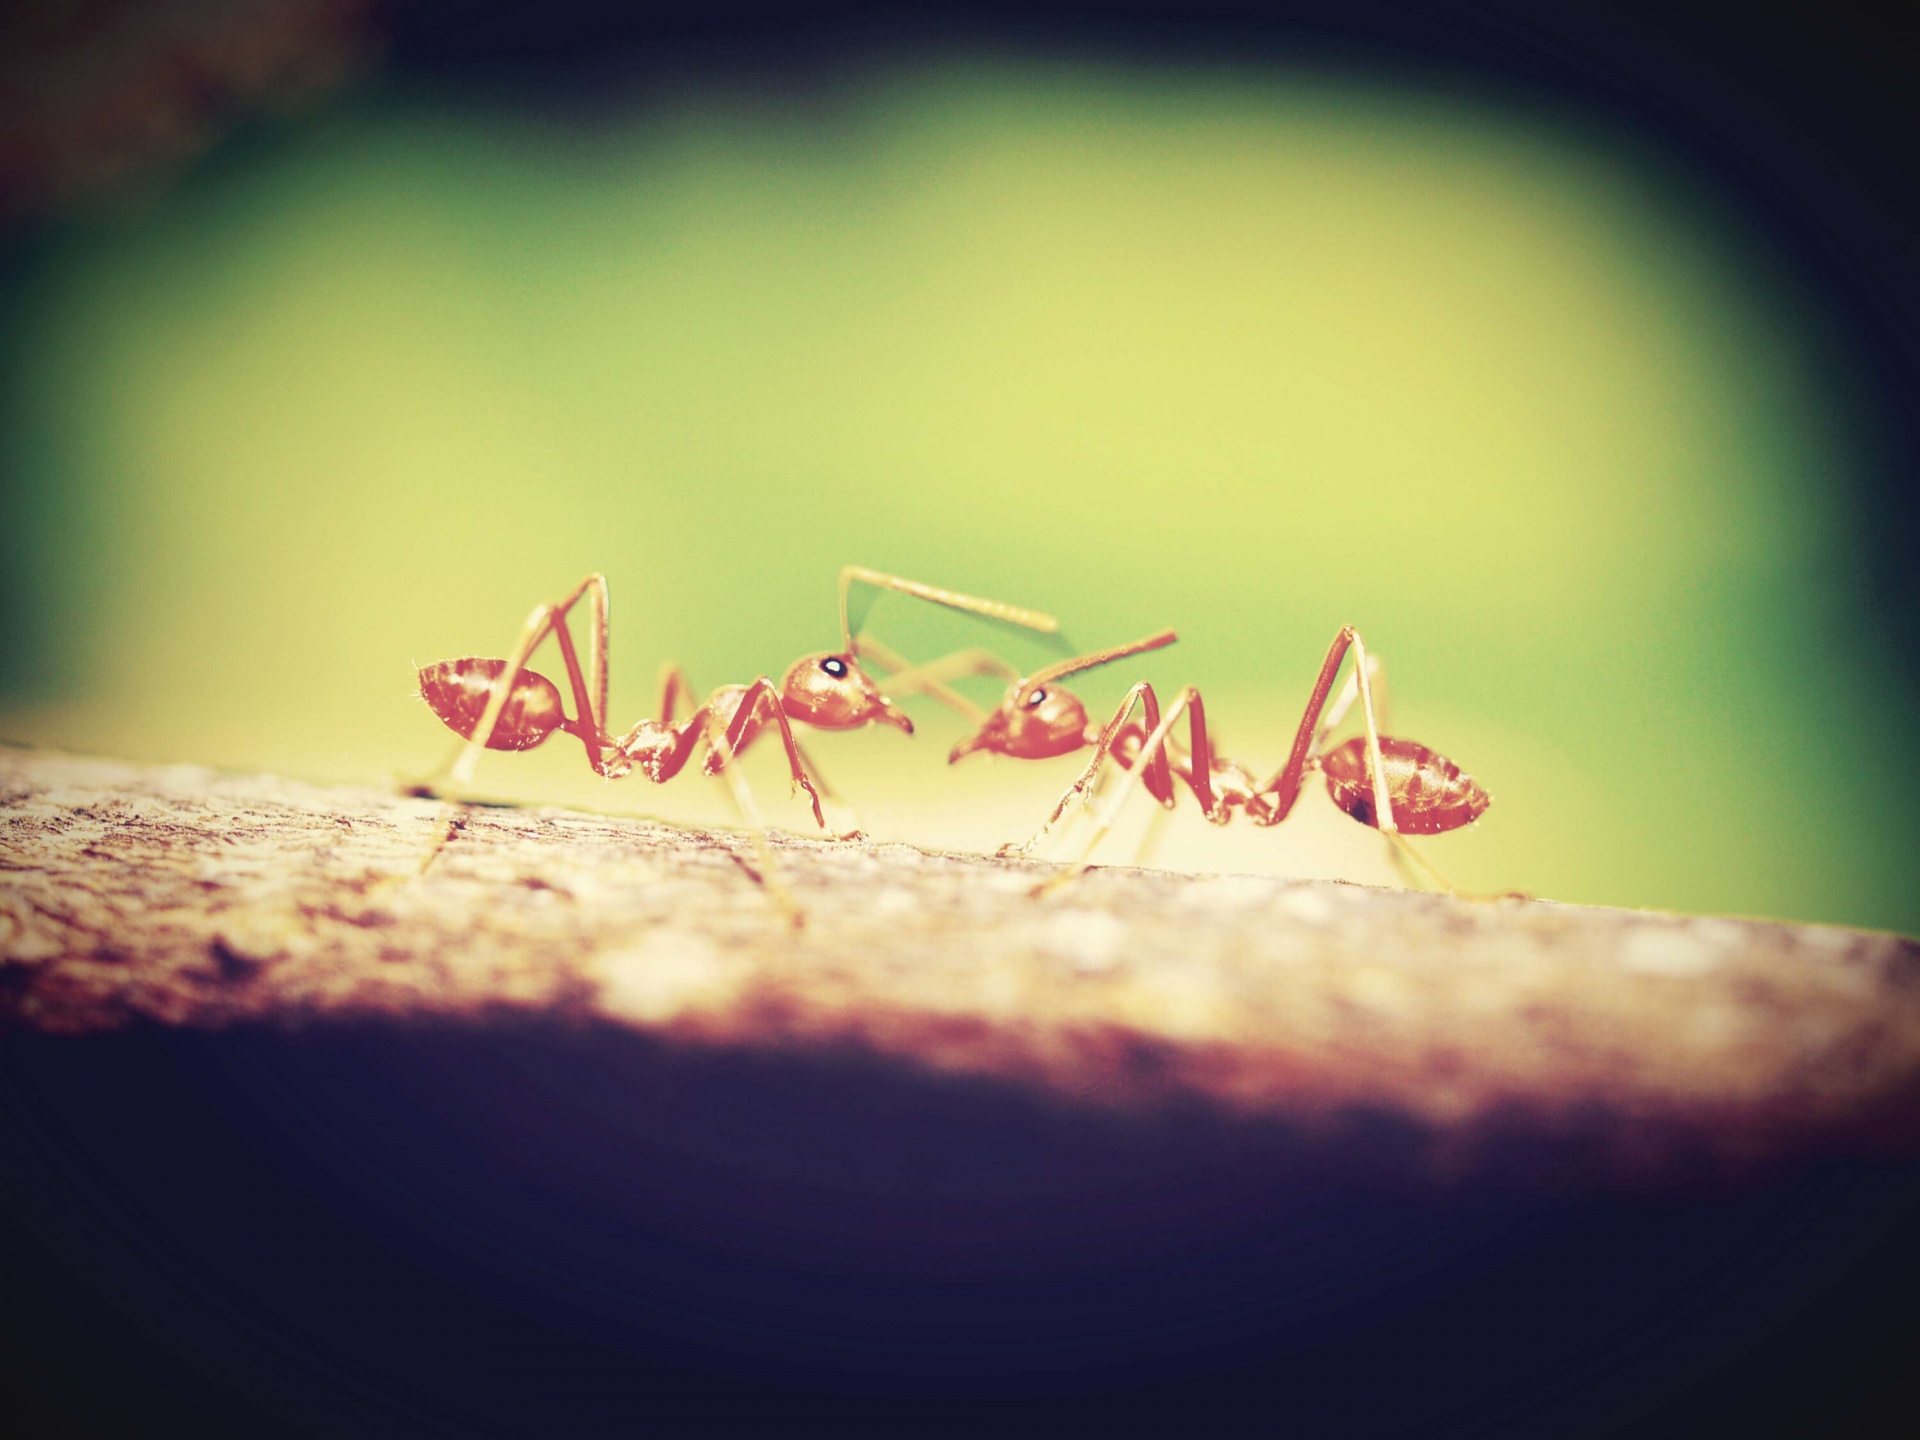 Red Ant Stock Photos